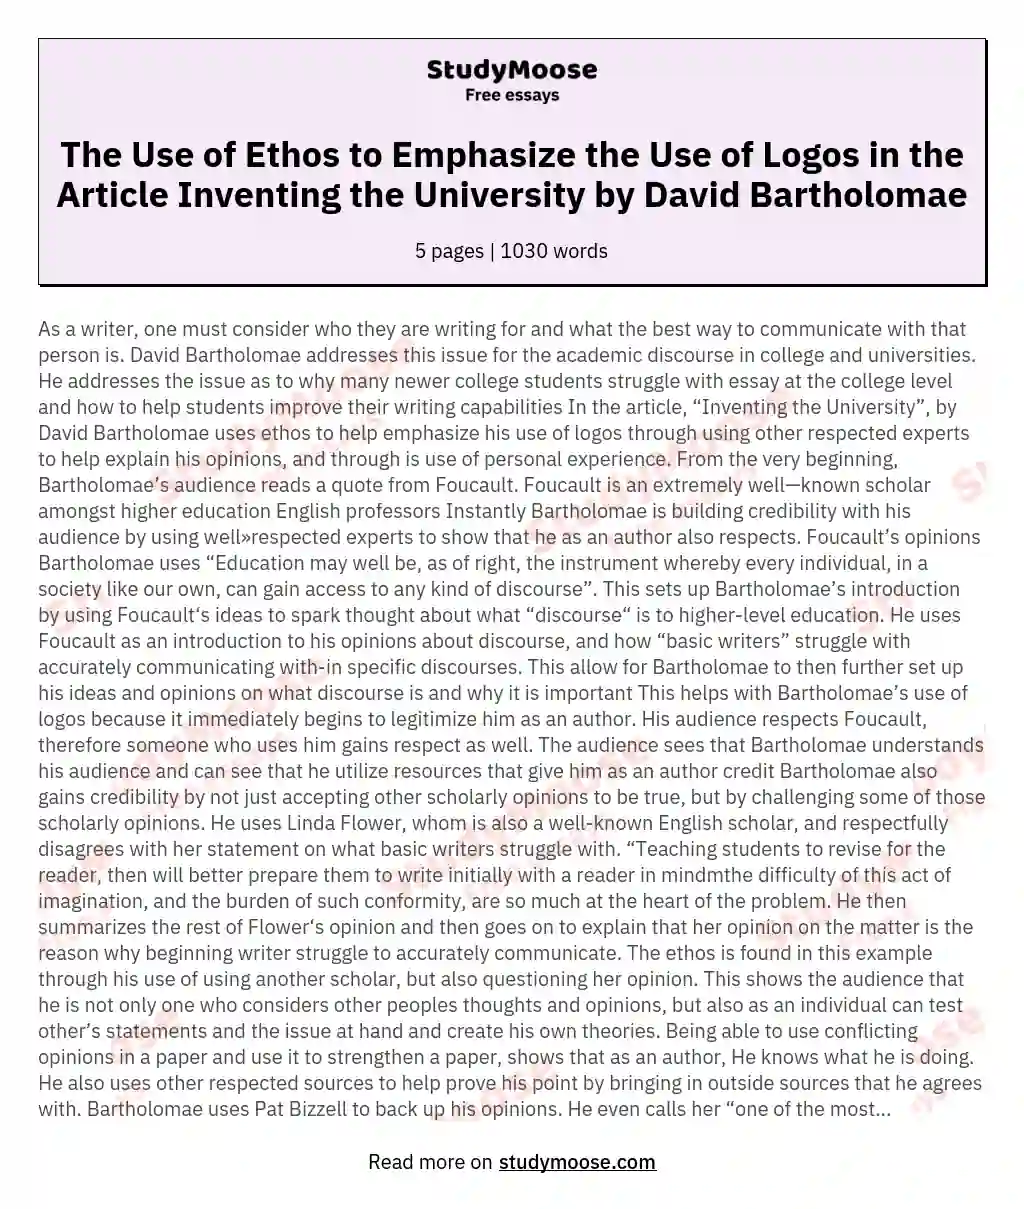 The Use of Ethos to Emphasize the Use of Logos in the Article Inventing the University by David Bartholomae essay